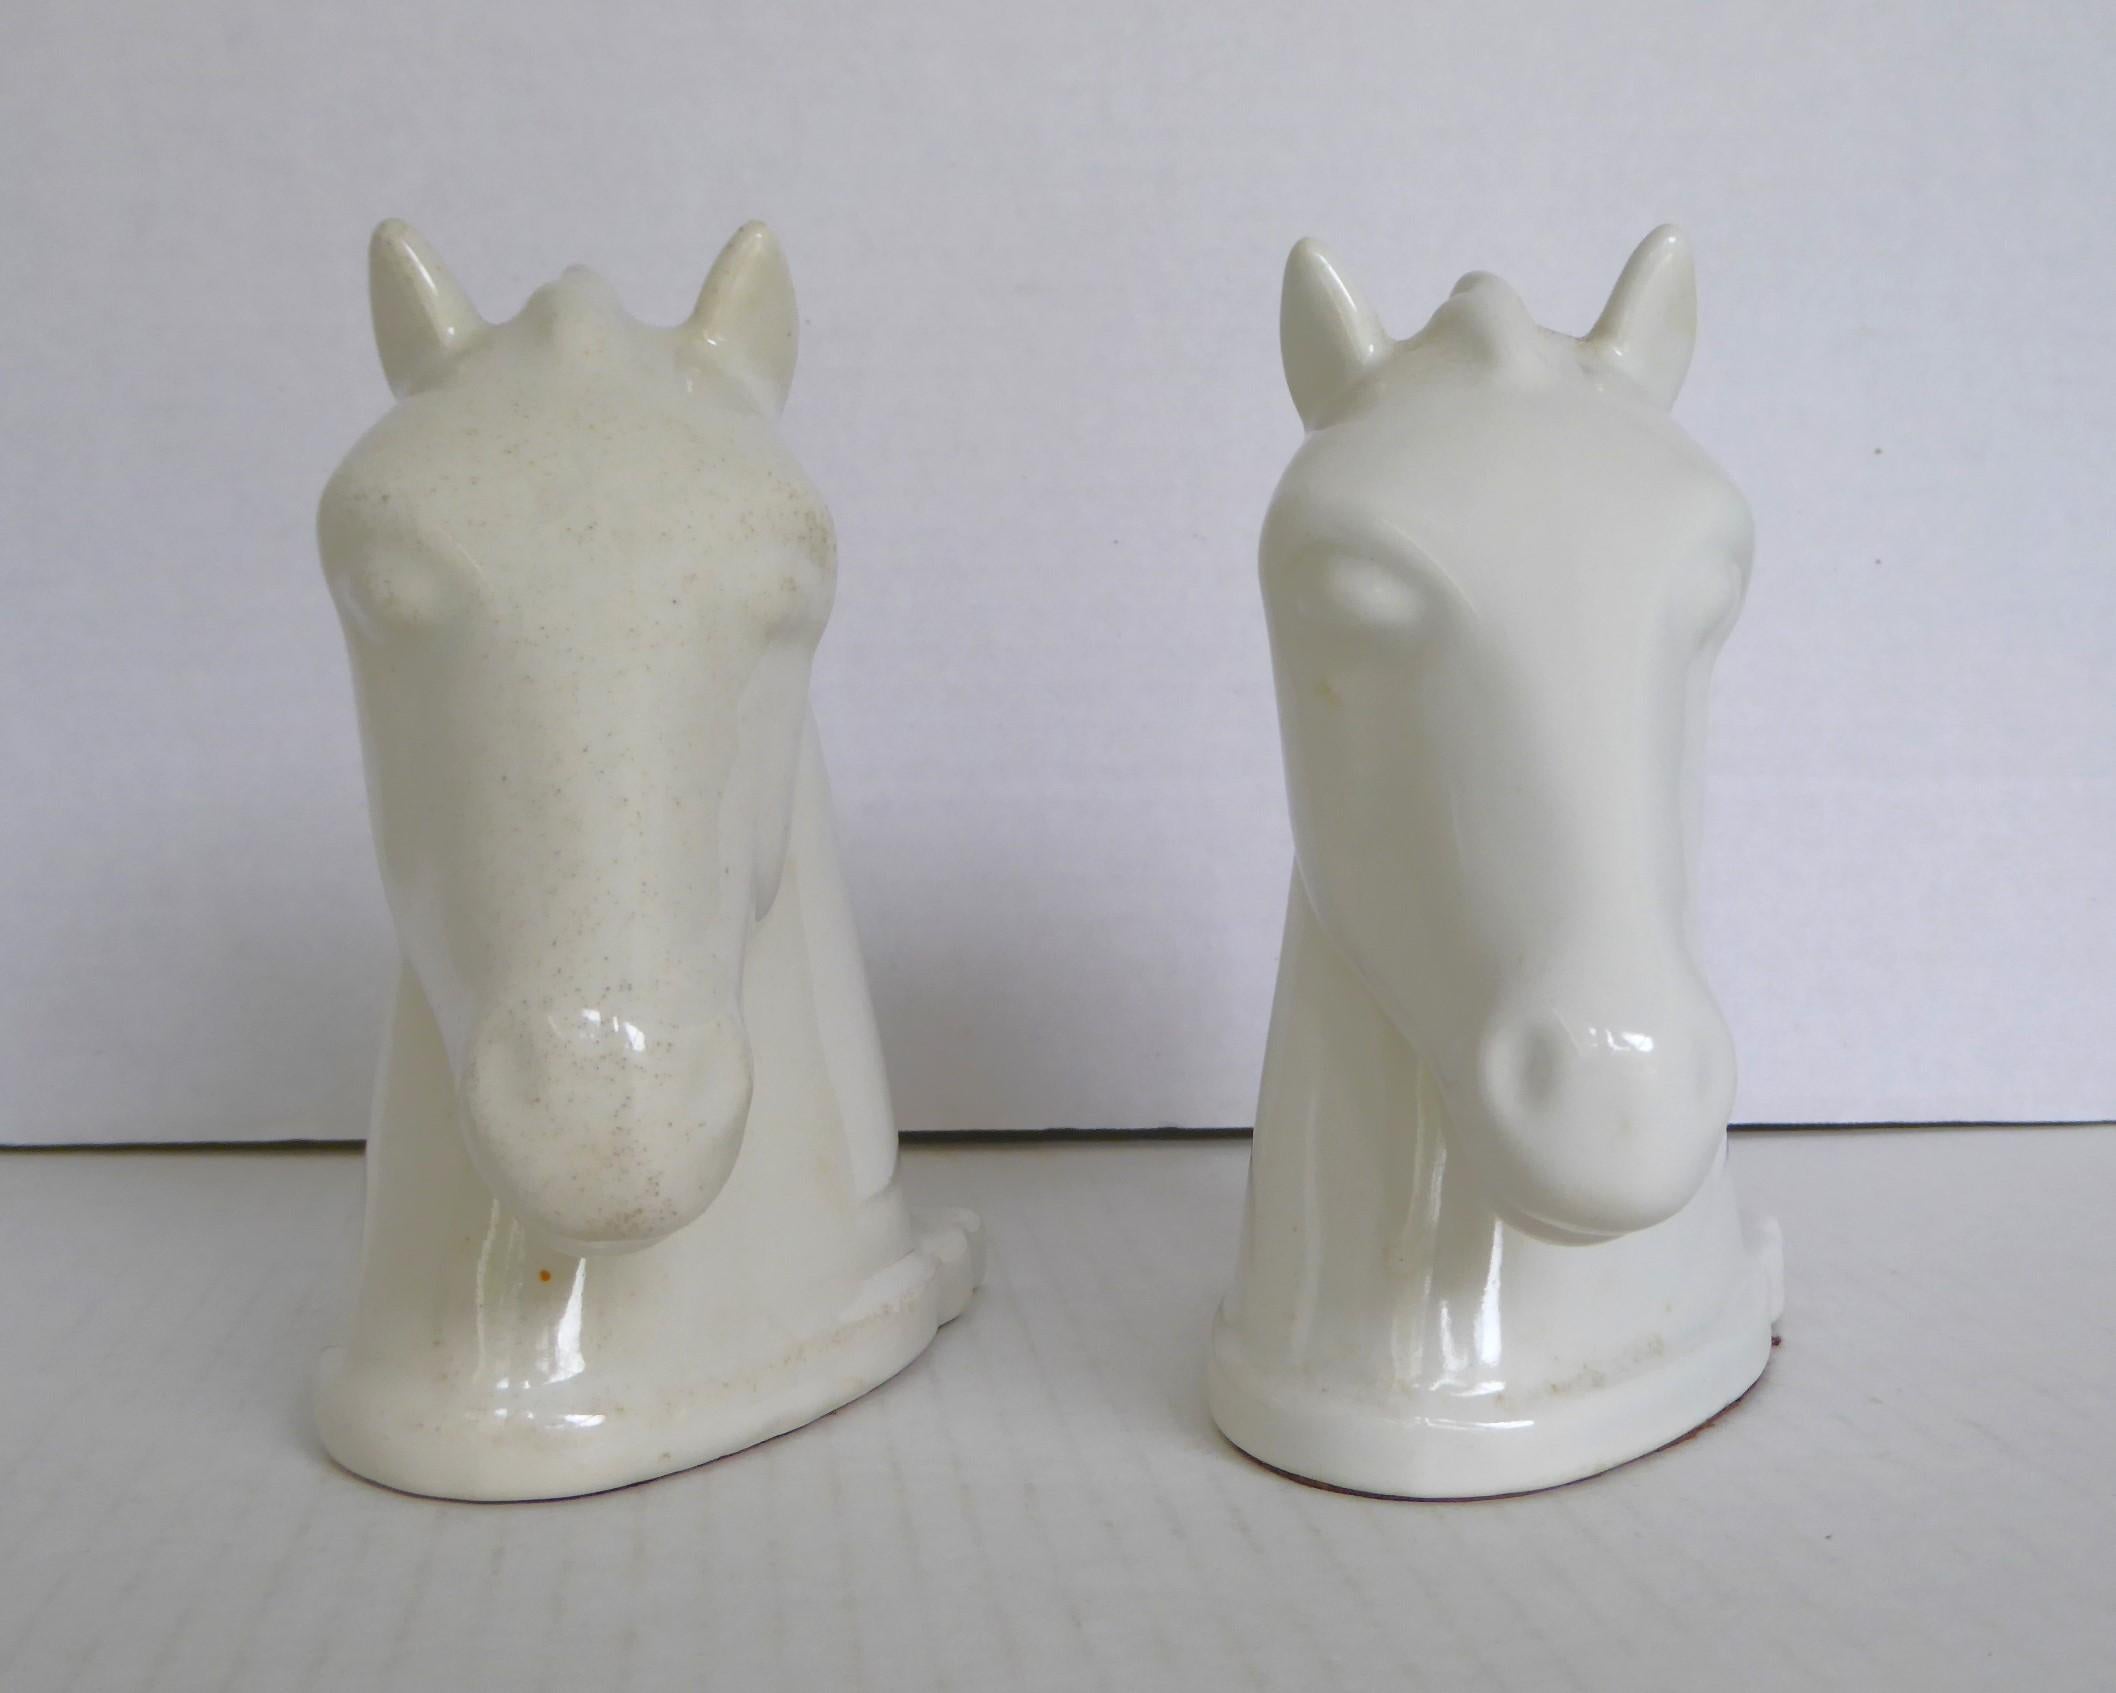 Handsome Pair of Mid Century white Horse Head Modern Bookends by Abingdon Potteries.   Beautiful designed horse heads bookends in glossy white glaze which were produced from 1938 through 1950. Due to the long production period, some of the glazes